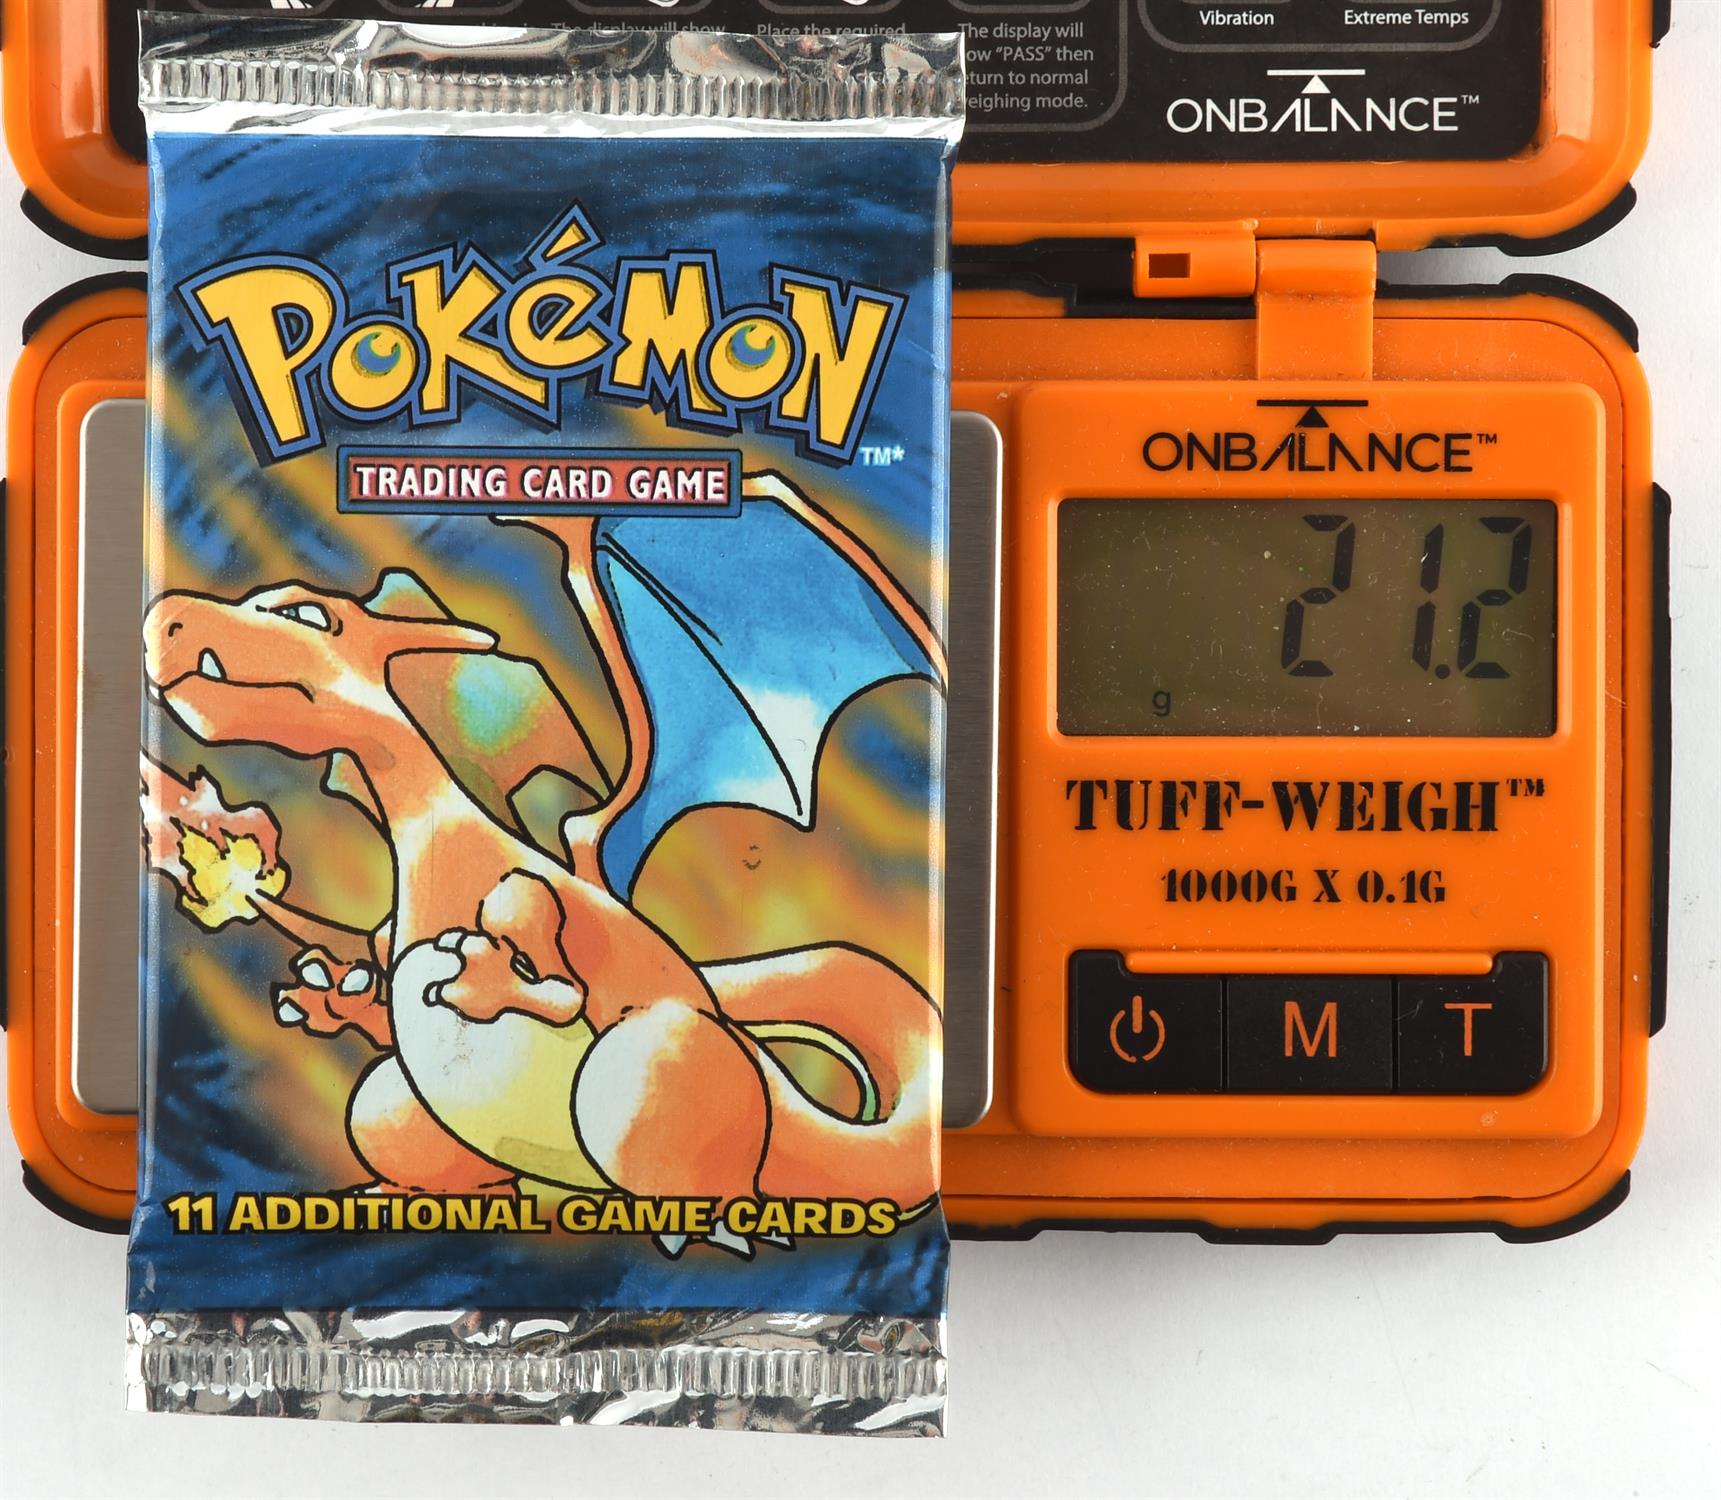 Pokemon TCG. Pokemon Base Set Sealed Booster Pack - Charizard Artwork, 21.2g. This item is from the - Image 3 of 3